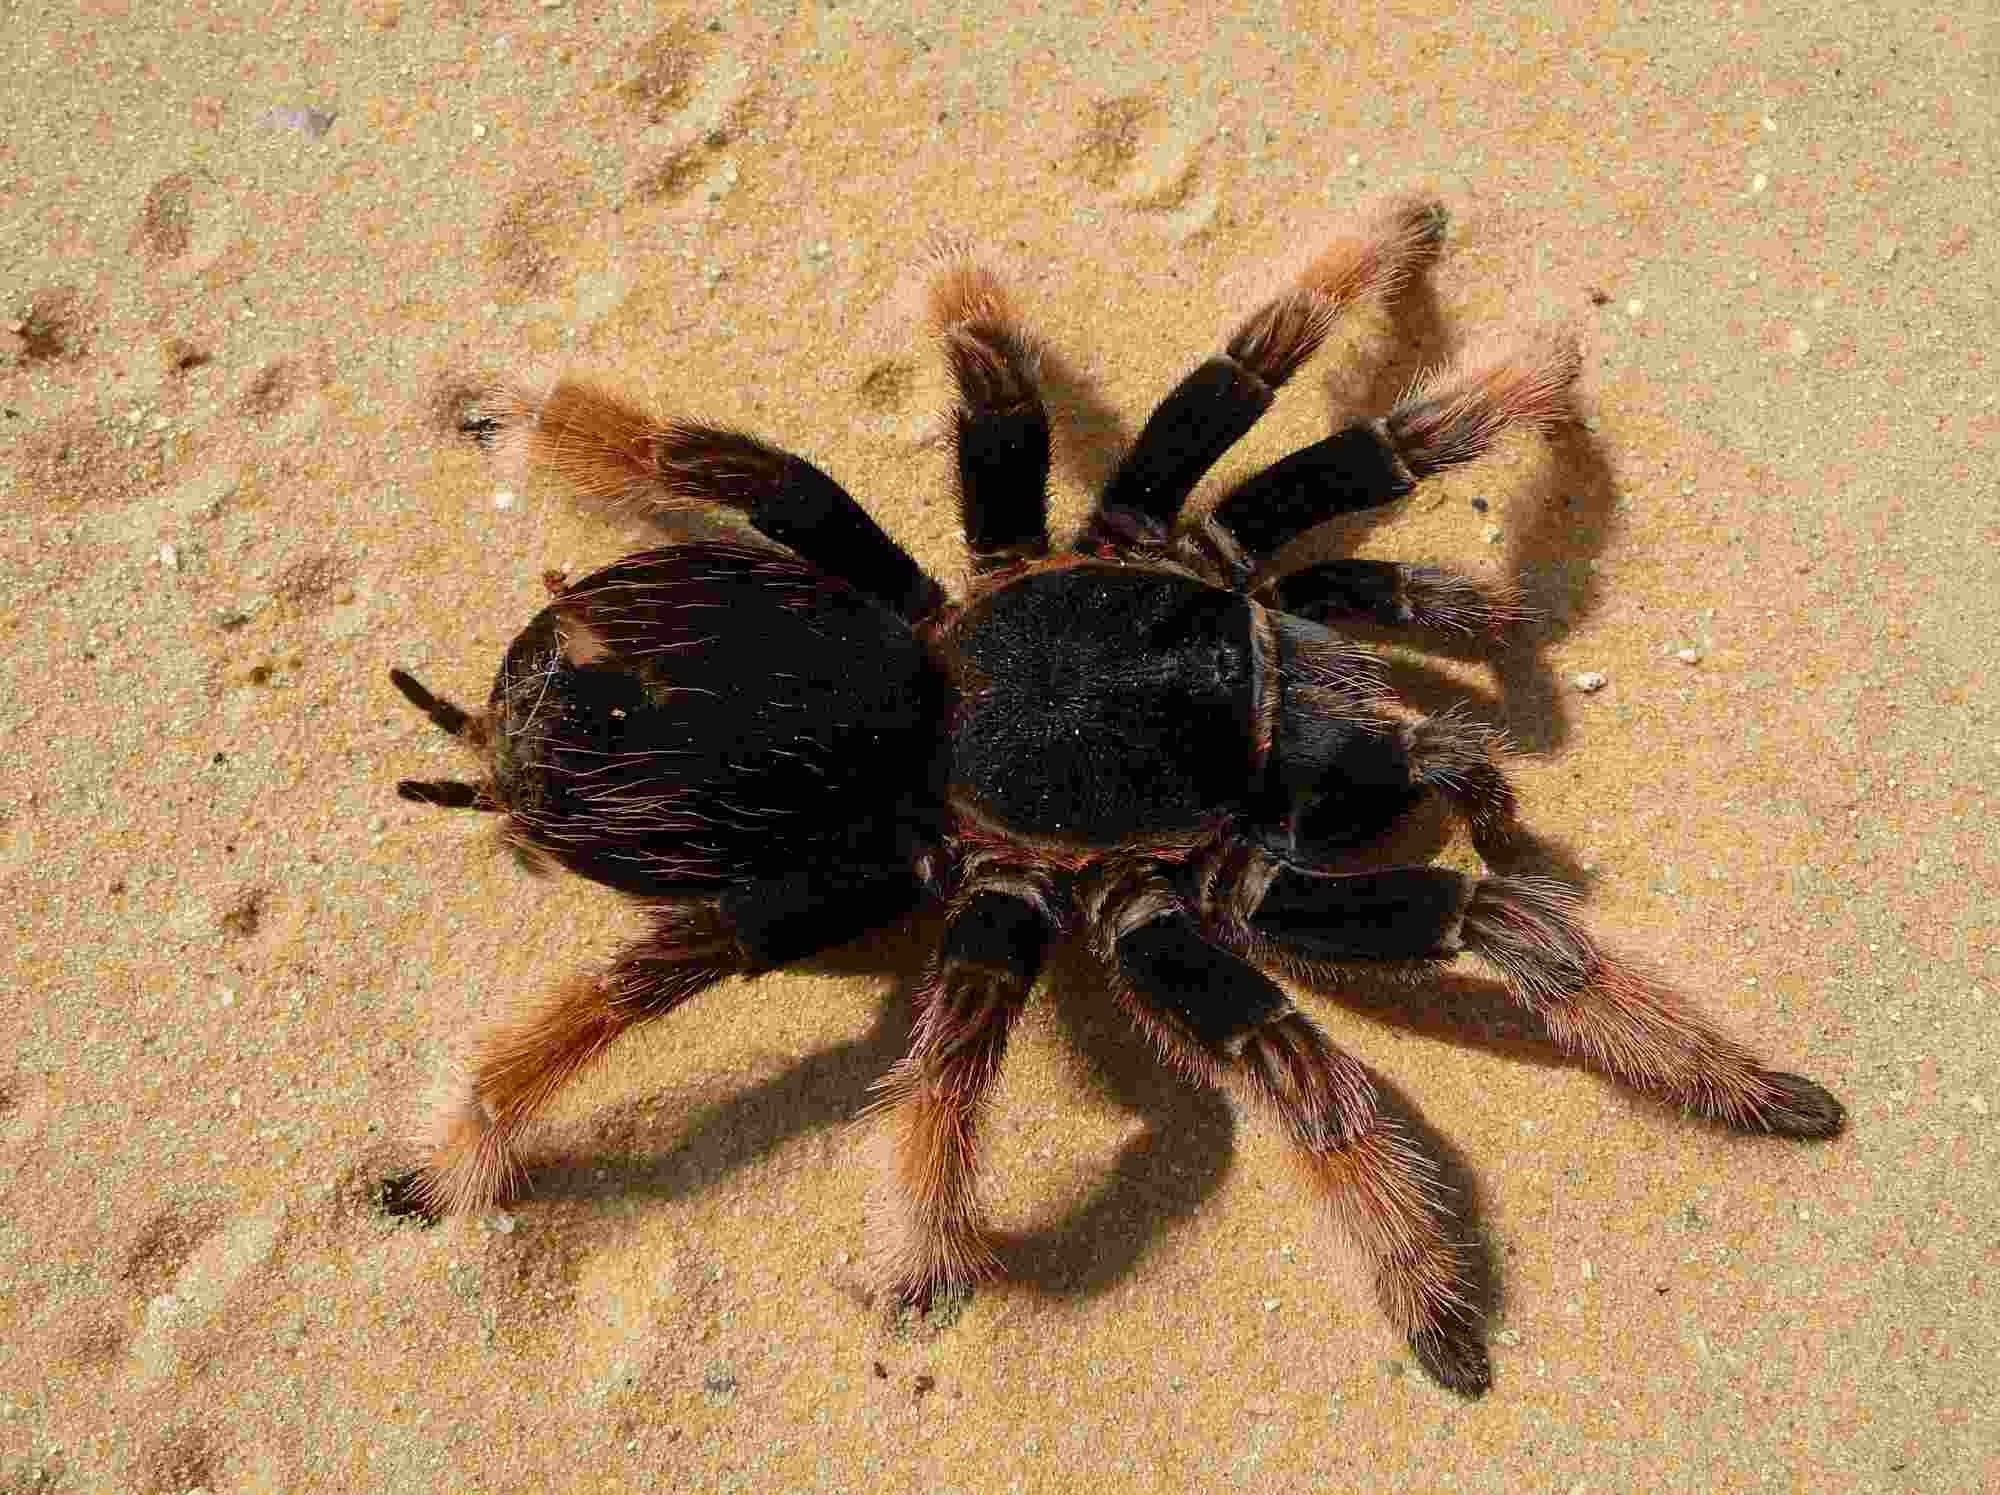 Most endangered spiders of the Theraphosidae family